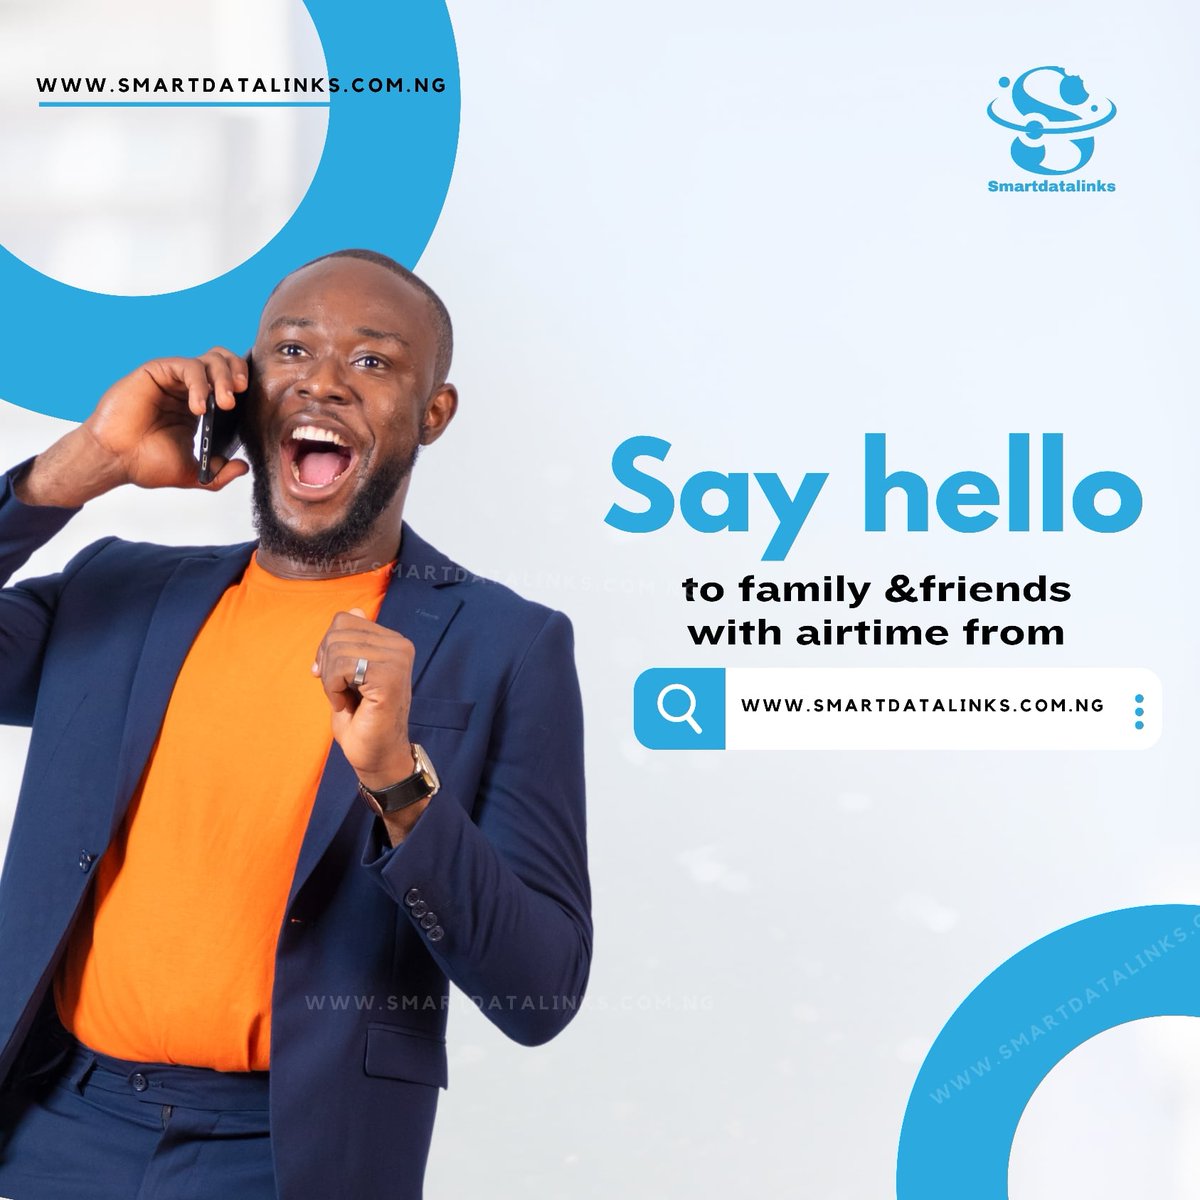 It's weekend again, say hello to your family and friends with airtime from smartdatalinks.com.ng 

#phyna  #Bobrisky  BVN and NIN  #opay  #ElozonamXDaine  Cuppy  Olamide Tunde Onakoya  Shan George  IBD Dende Chowdeck Teni CONGRATULATIONS CROSS Mr Bayo